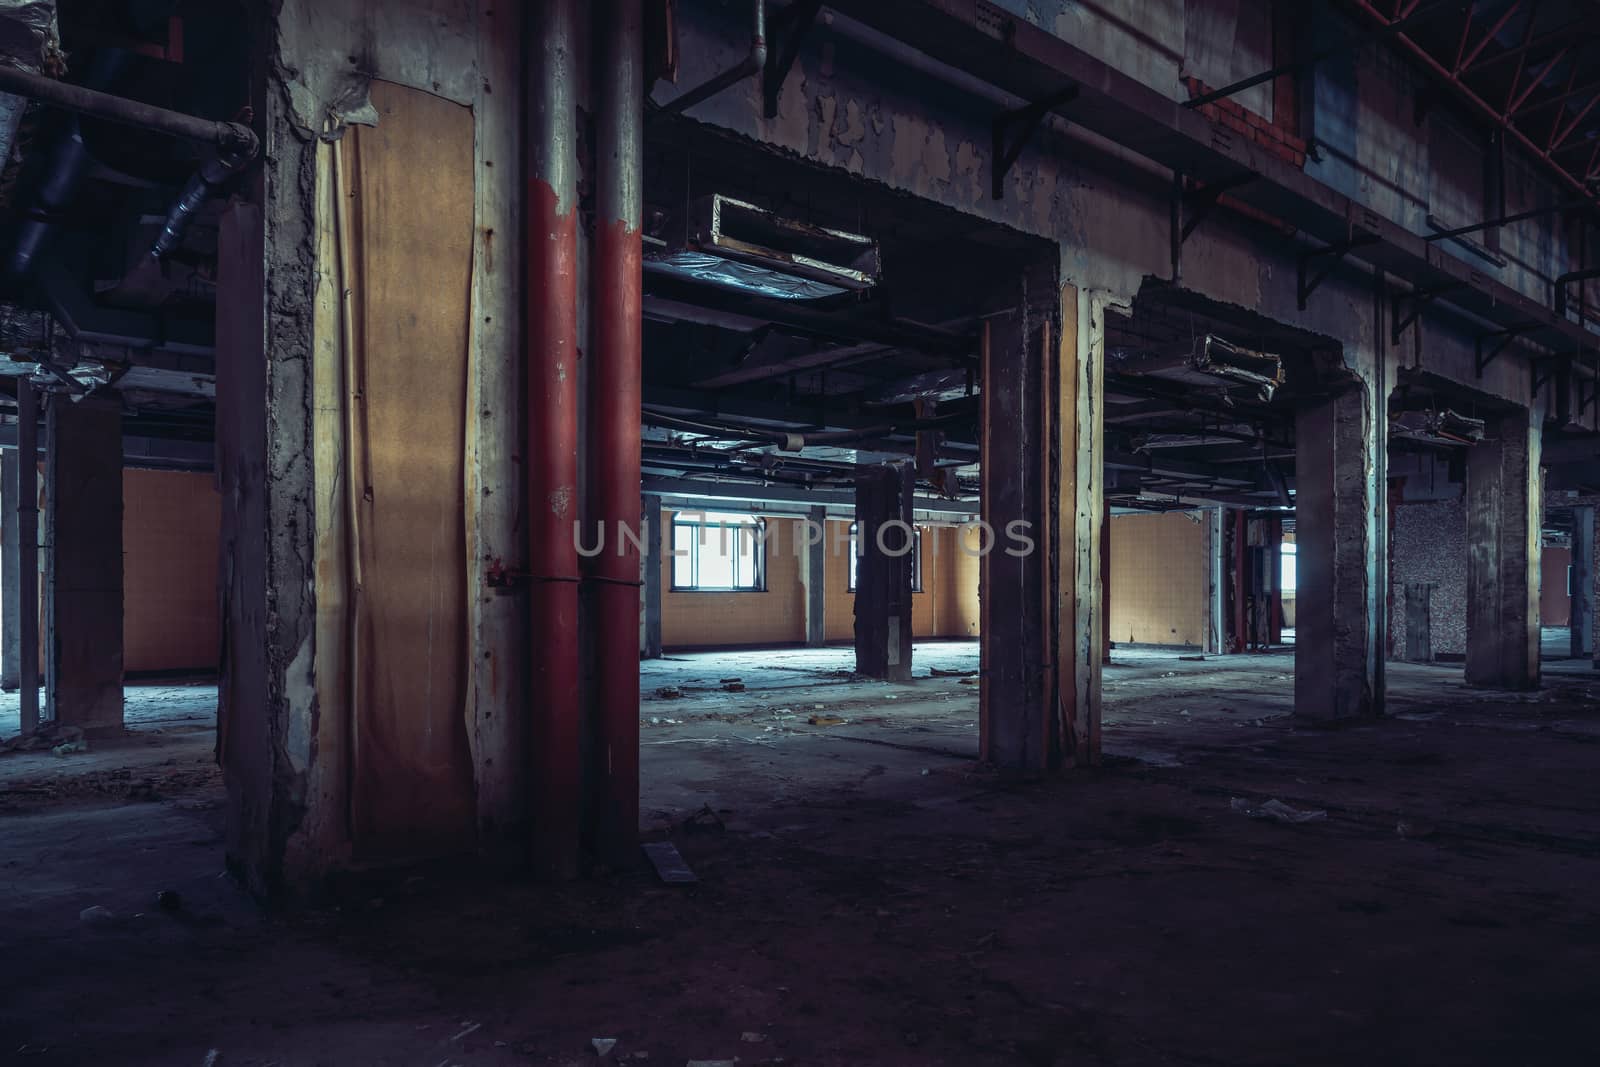 The abandoned industrial building. Fantasy interior scene. Shot in an abandoned ruin.